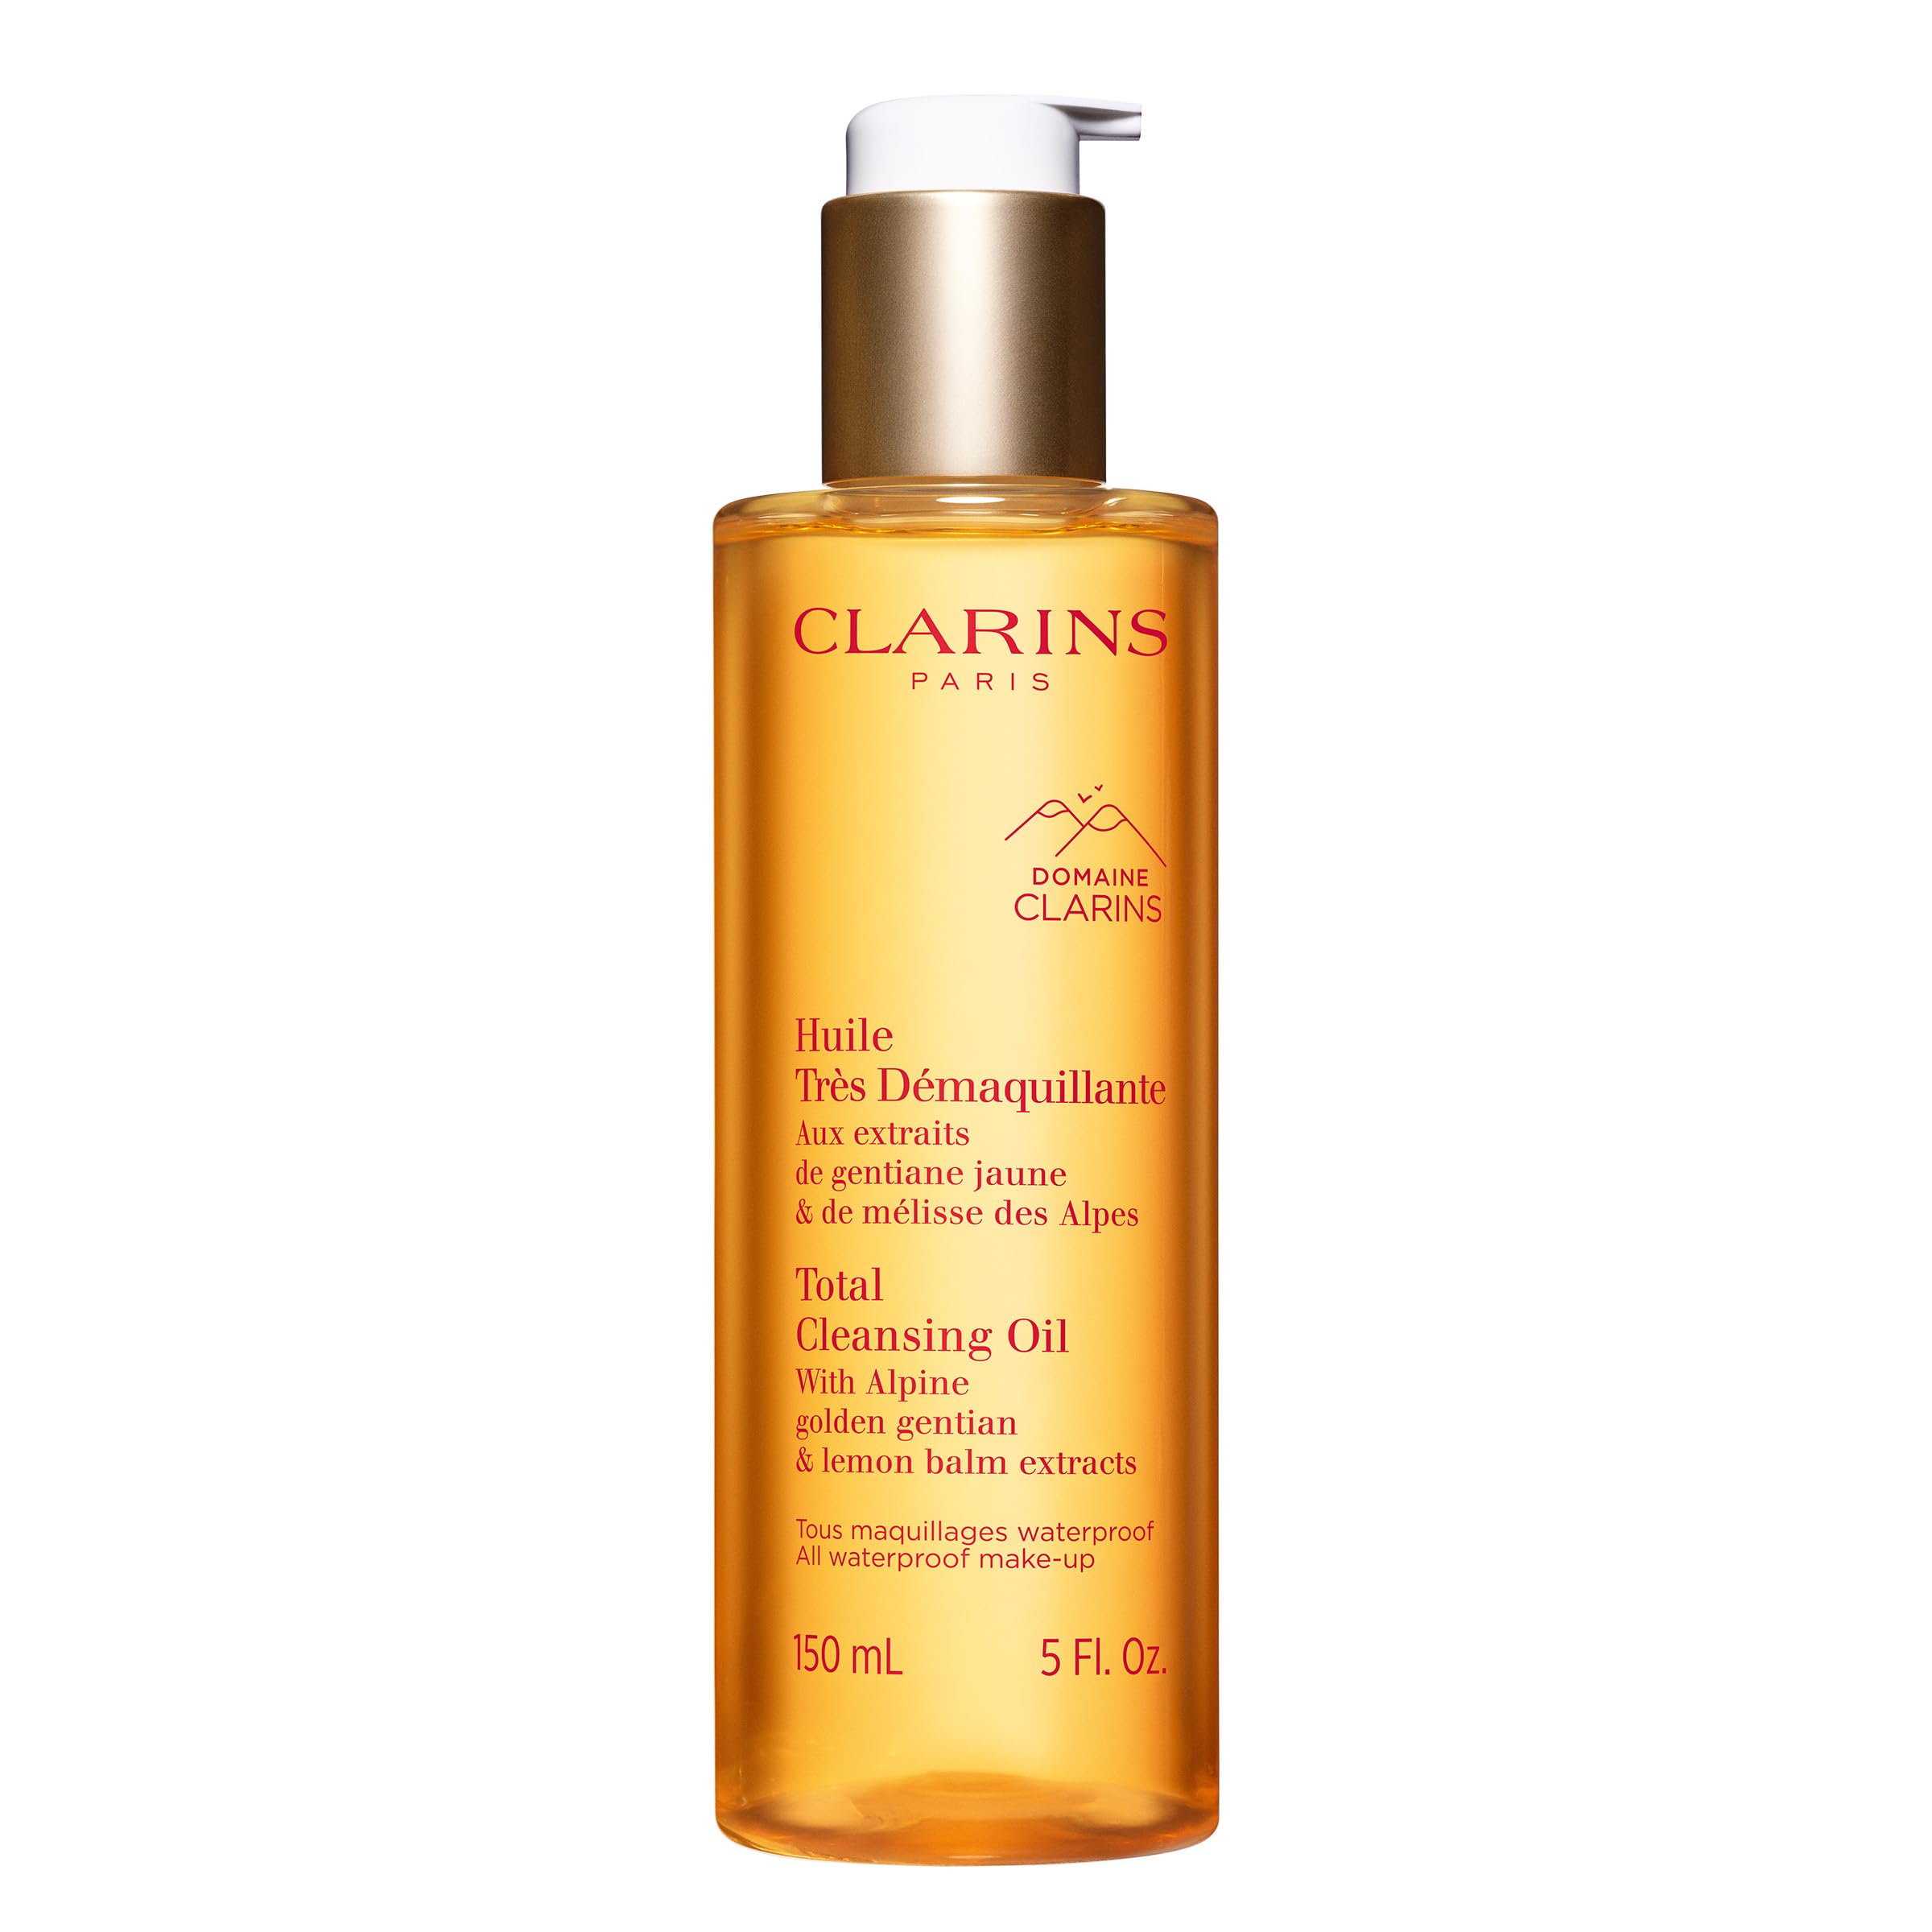 Clarins Total Cleansing Oil | 5 Fl oz